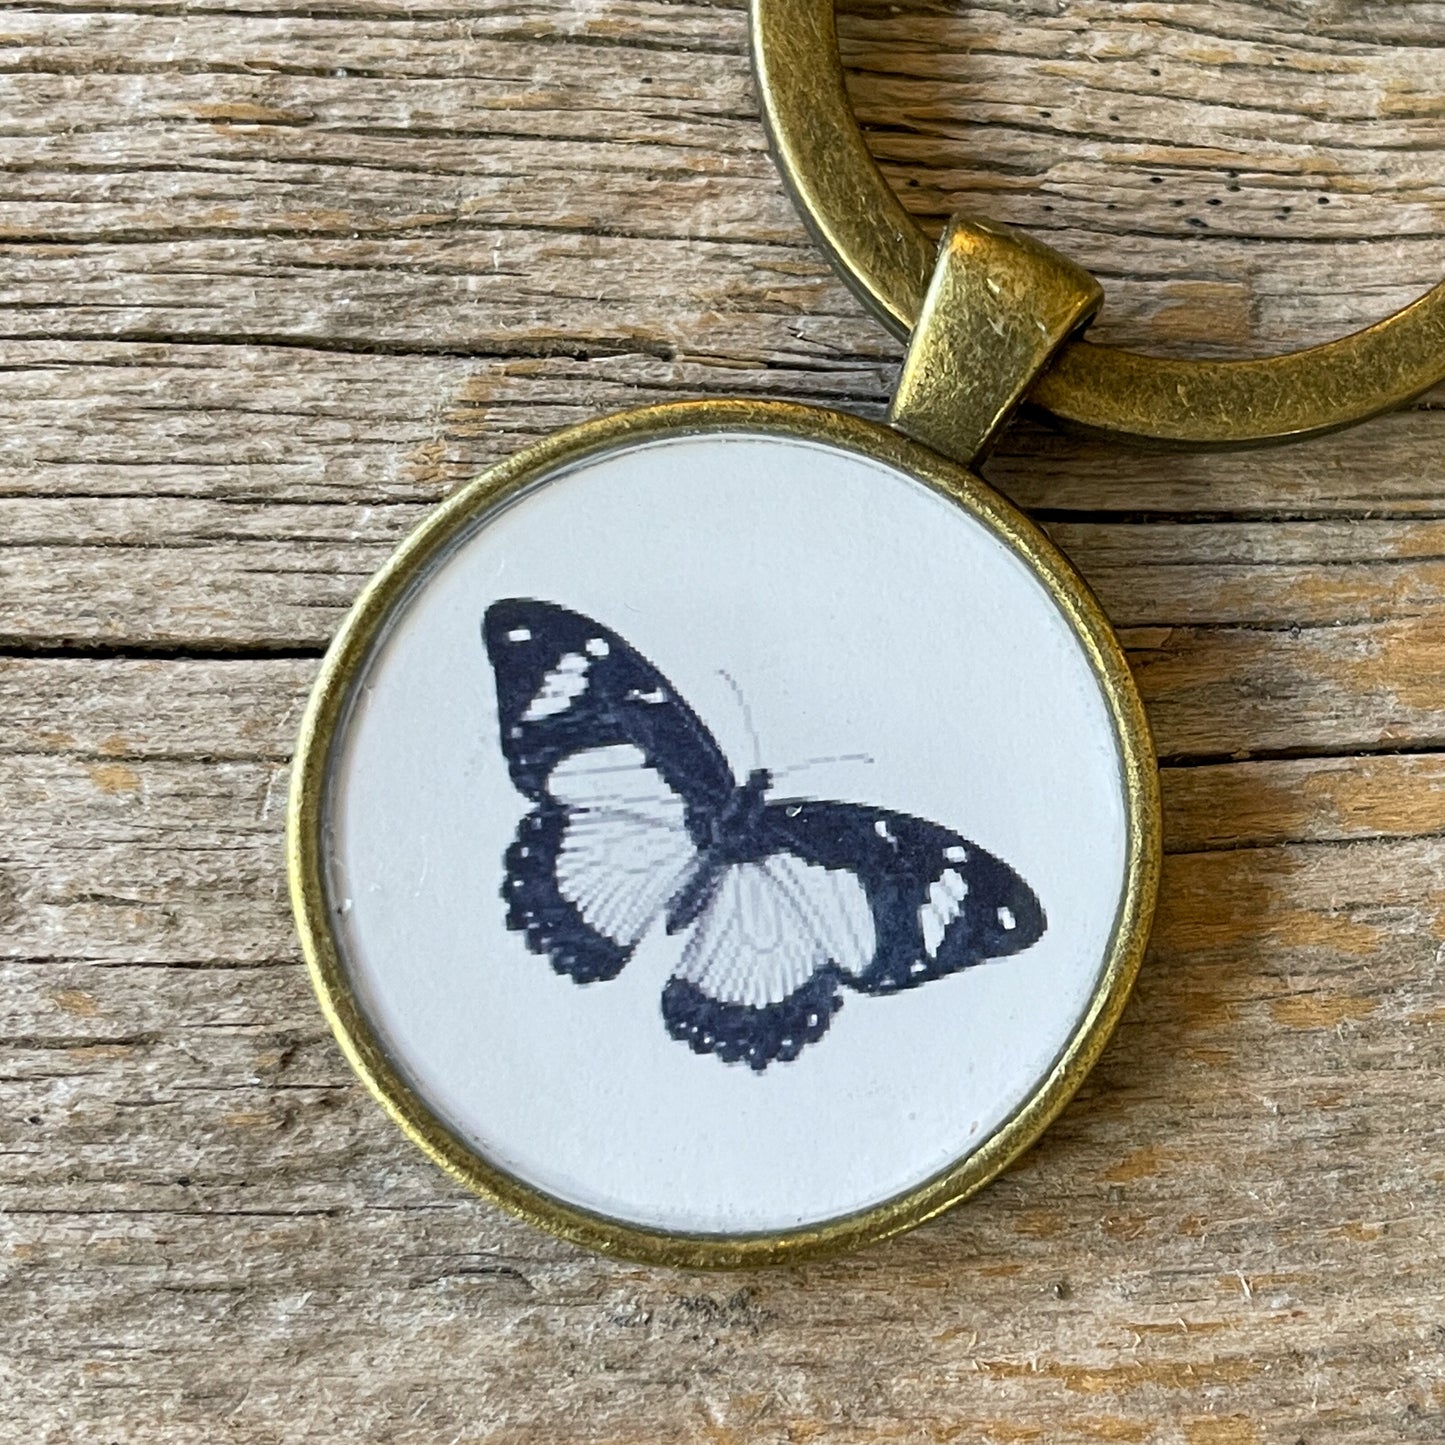 Butterfly Vintage Image Keychain